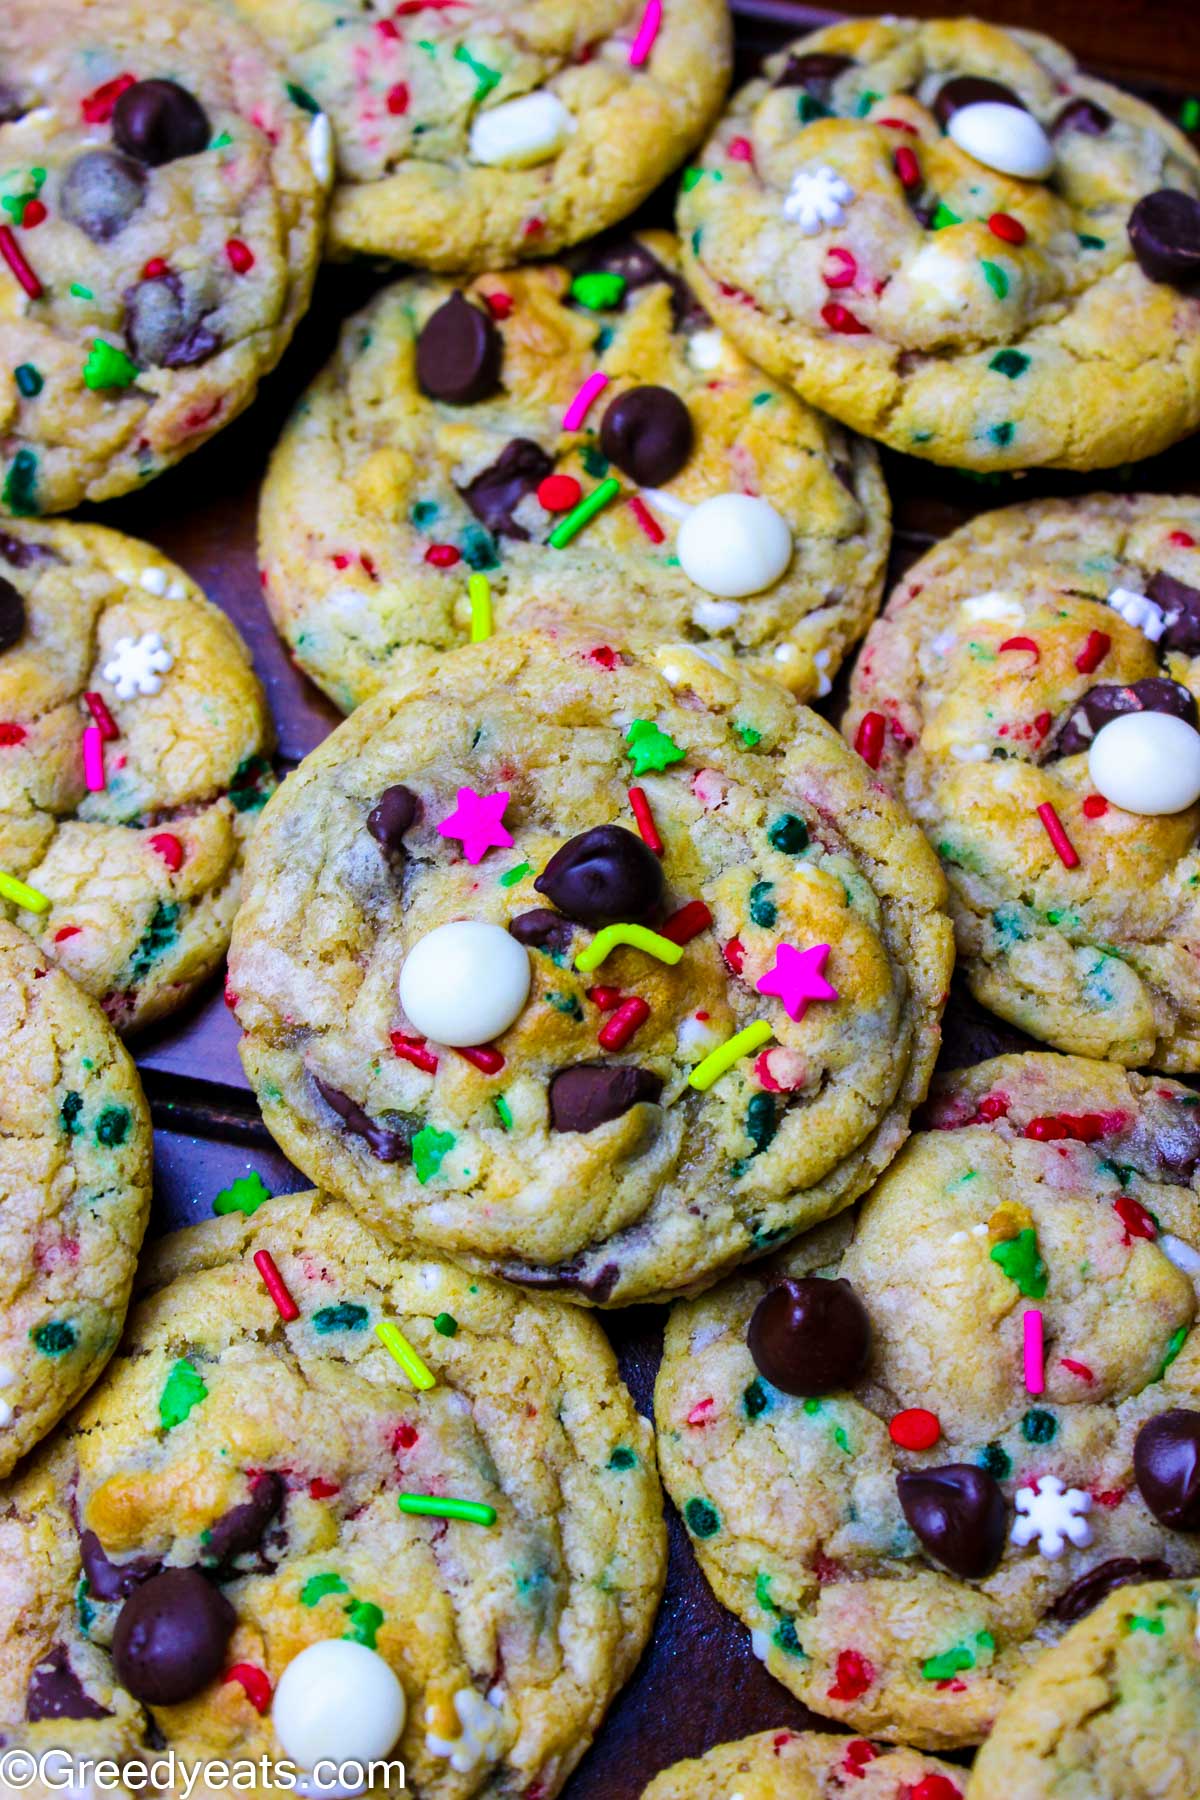 Studded with semi sweet chocolate chips, white chocolate chips and sprinkles, these are soft chocolate chip cookies.